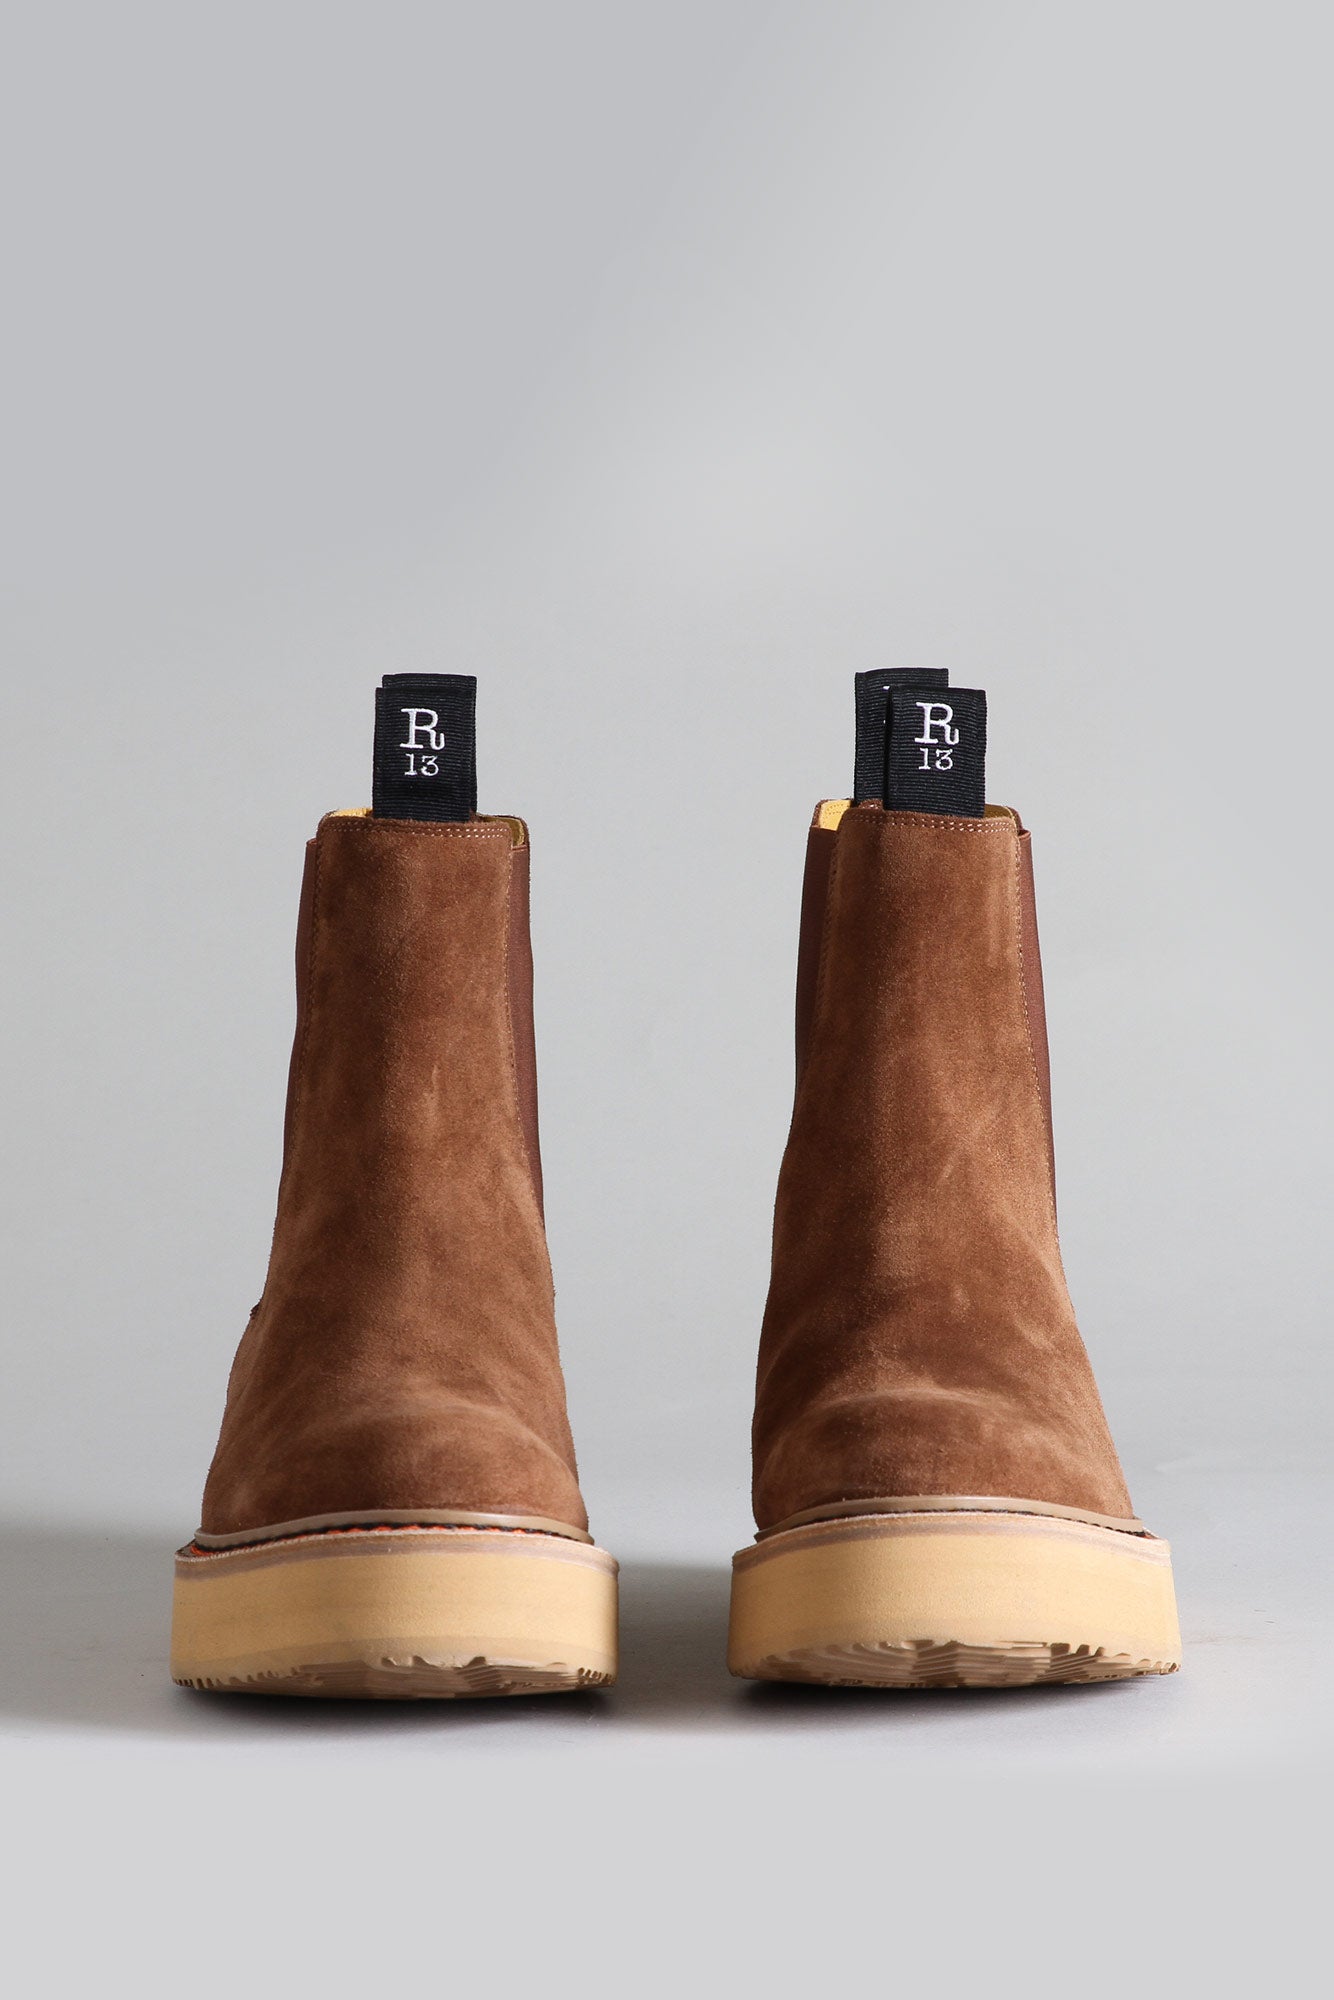 SINGLE STACK CHELSEA BOOT - BROWN SUEDE